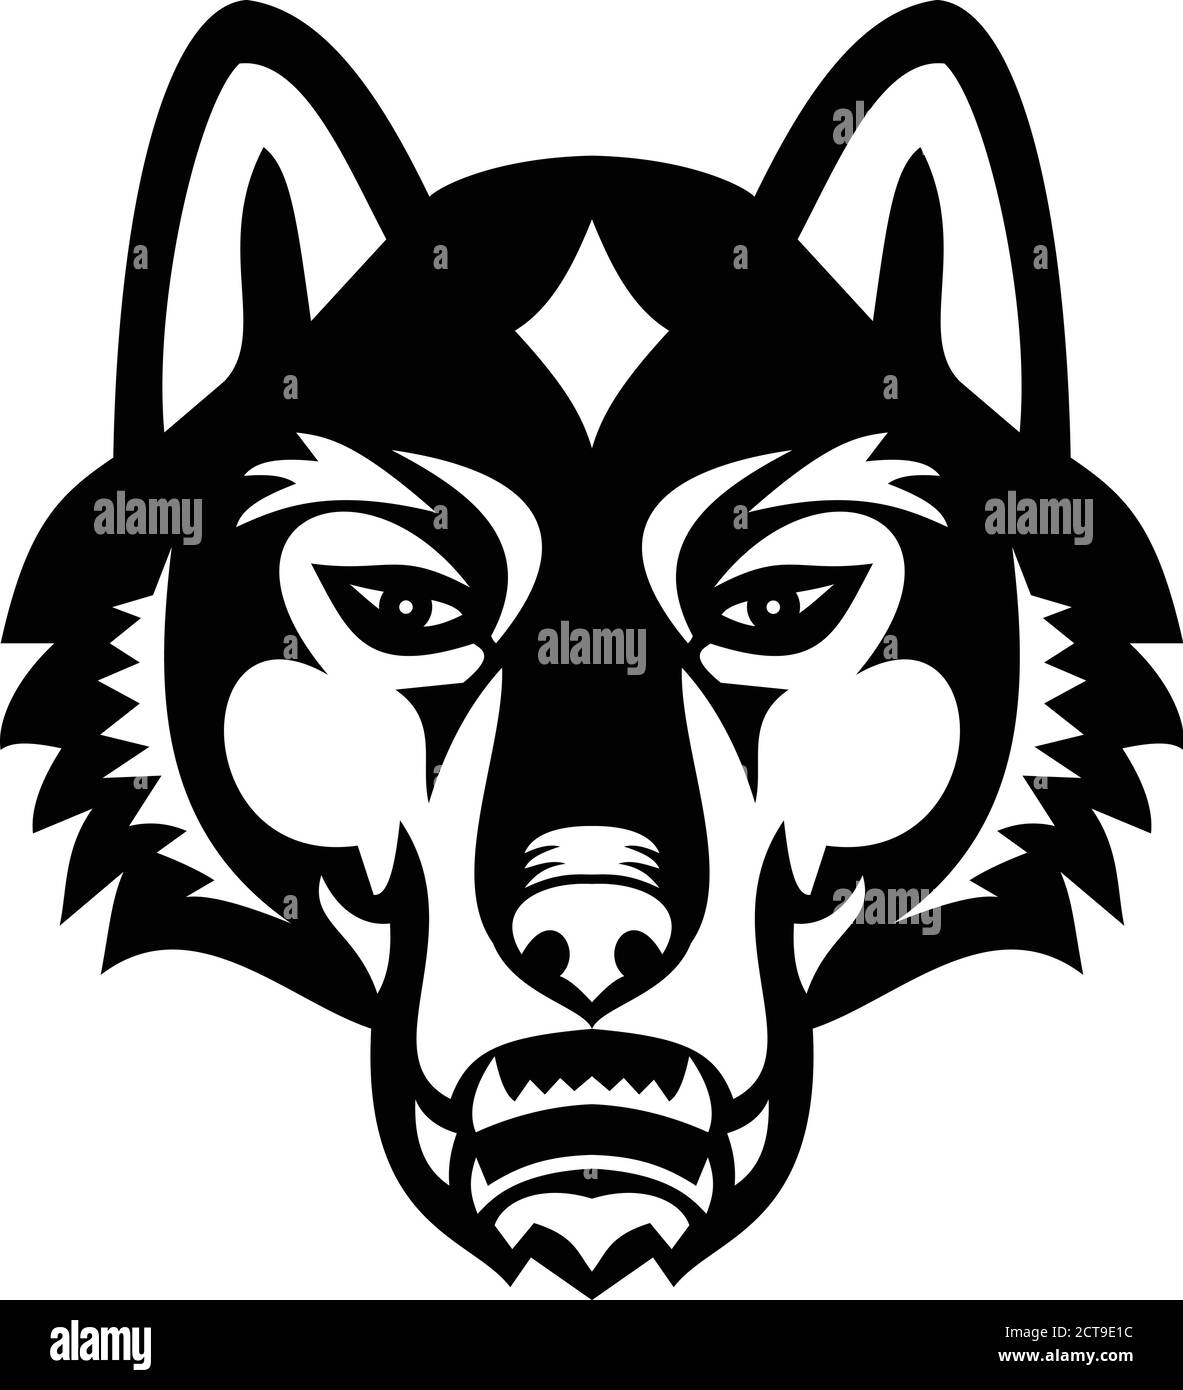 Mascot black and white illustration of head of a gray wolf also known as the timber wolf or western wolf, viewed from front on isolated background in Stock Vector